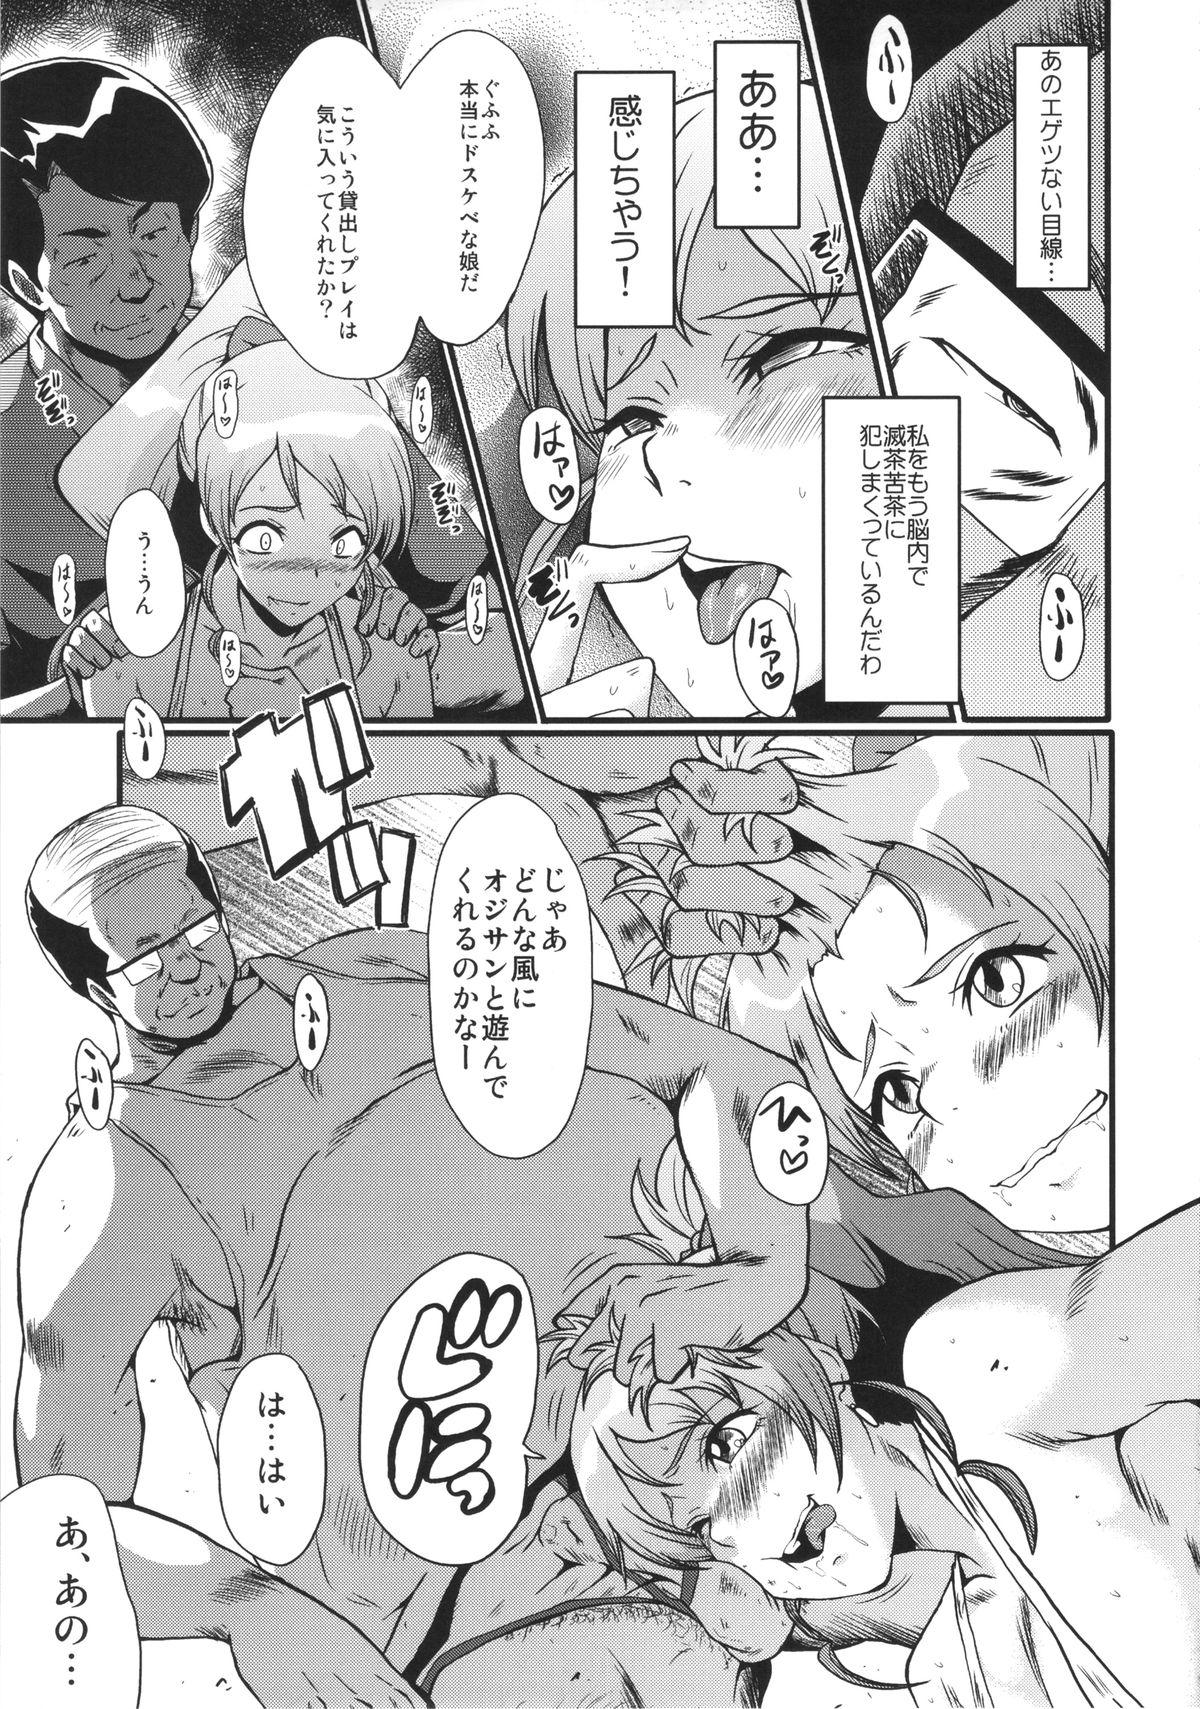 Juicy Urabambi Vol. 50 - Happinesscharge precure Pounded - Page 8